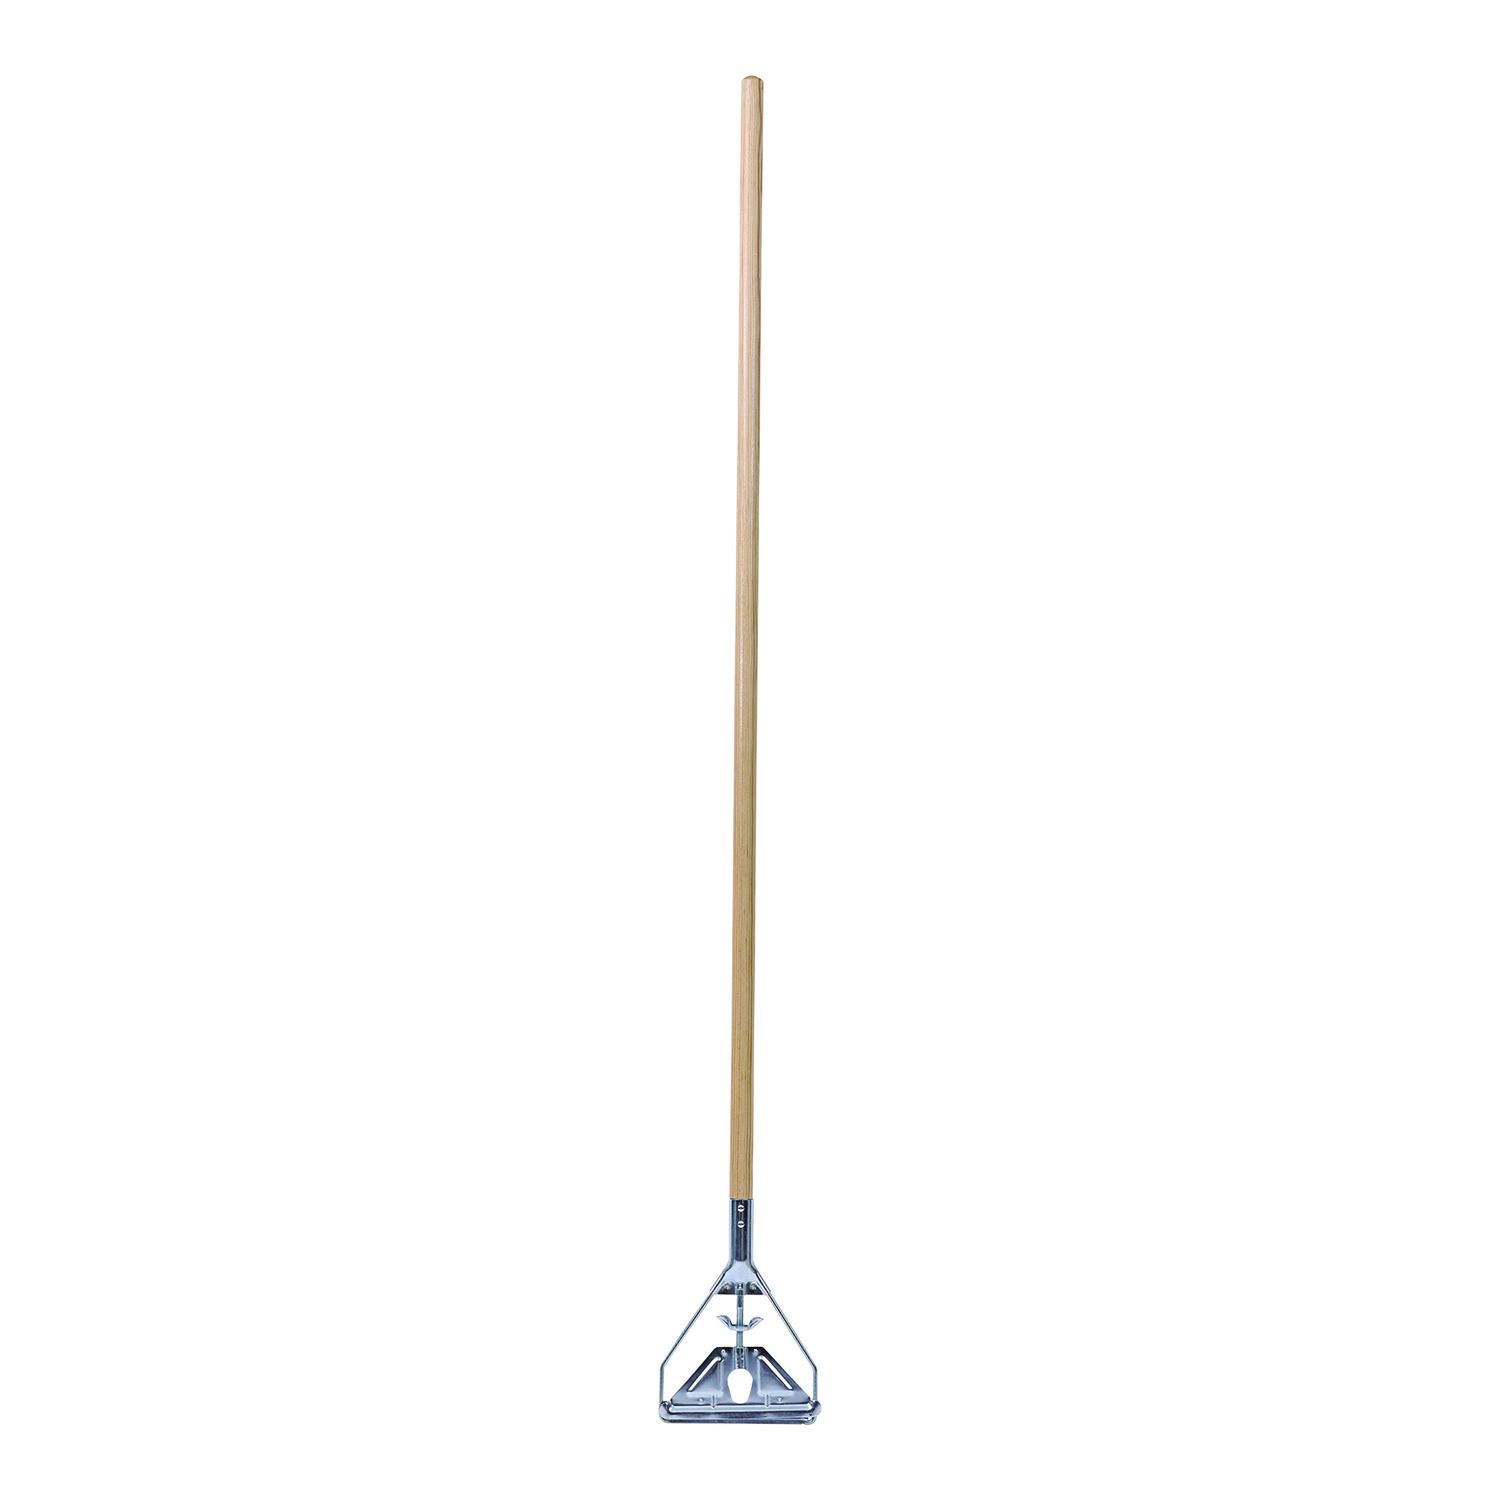 Quick Change Metal Head Mop Handle for No. 20 and Up Heads, 62" Wood Handle